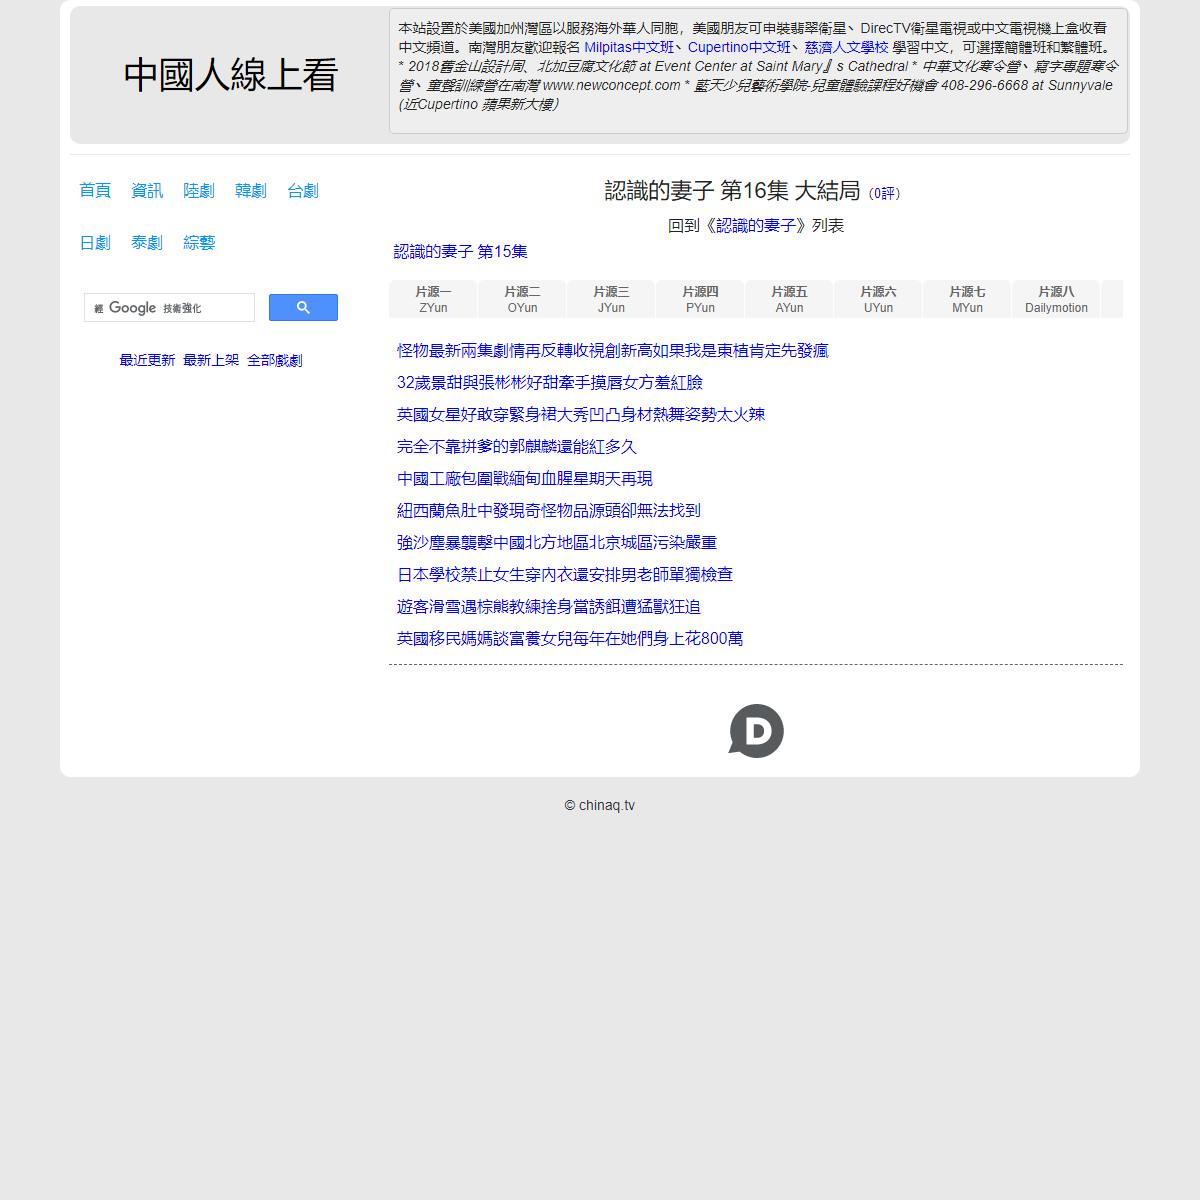 A complete backup of https://chinaq.tv/kr180801/16.html